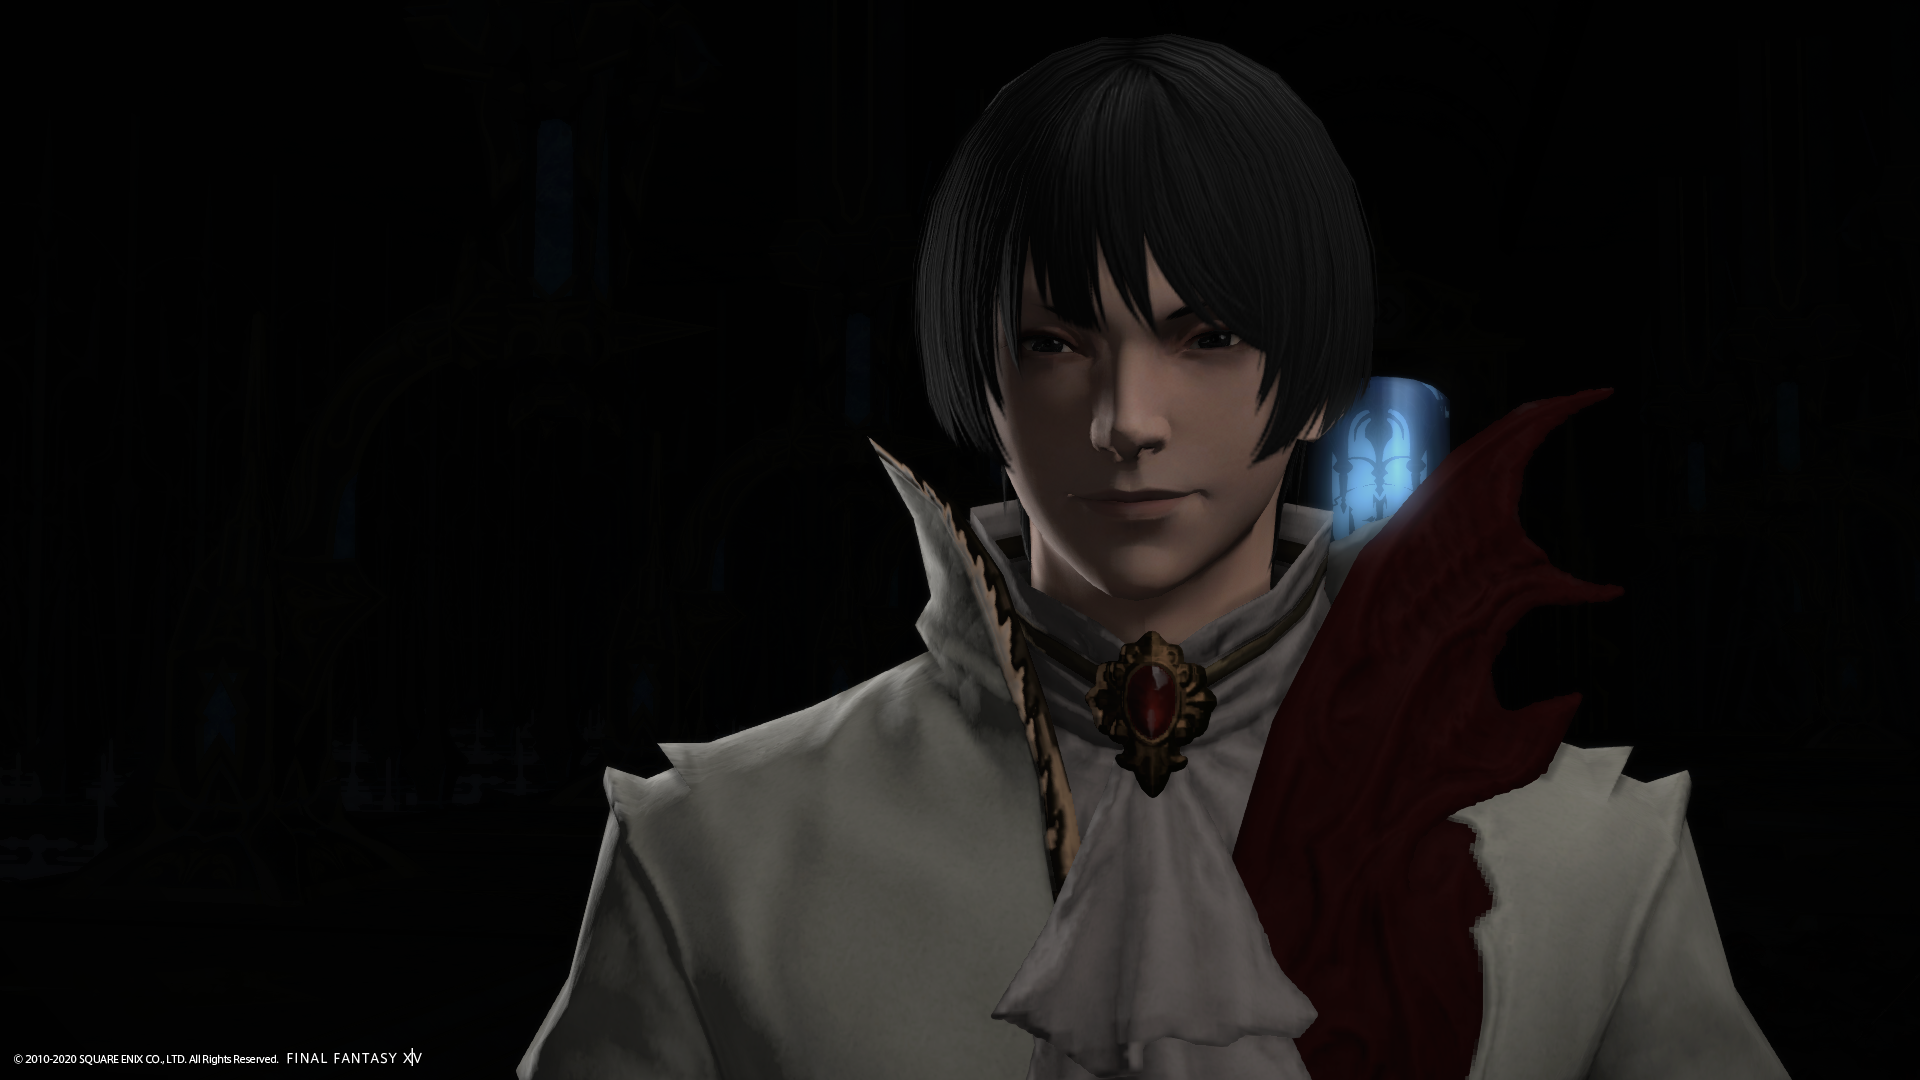 Fandaniel is a non-player character in Final Fantasy XIV. 